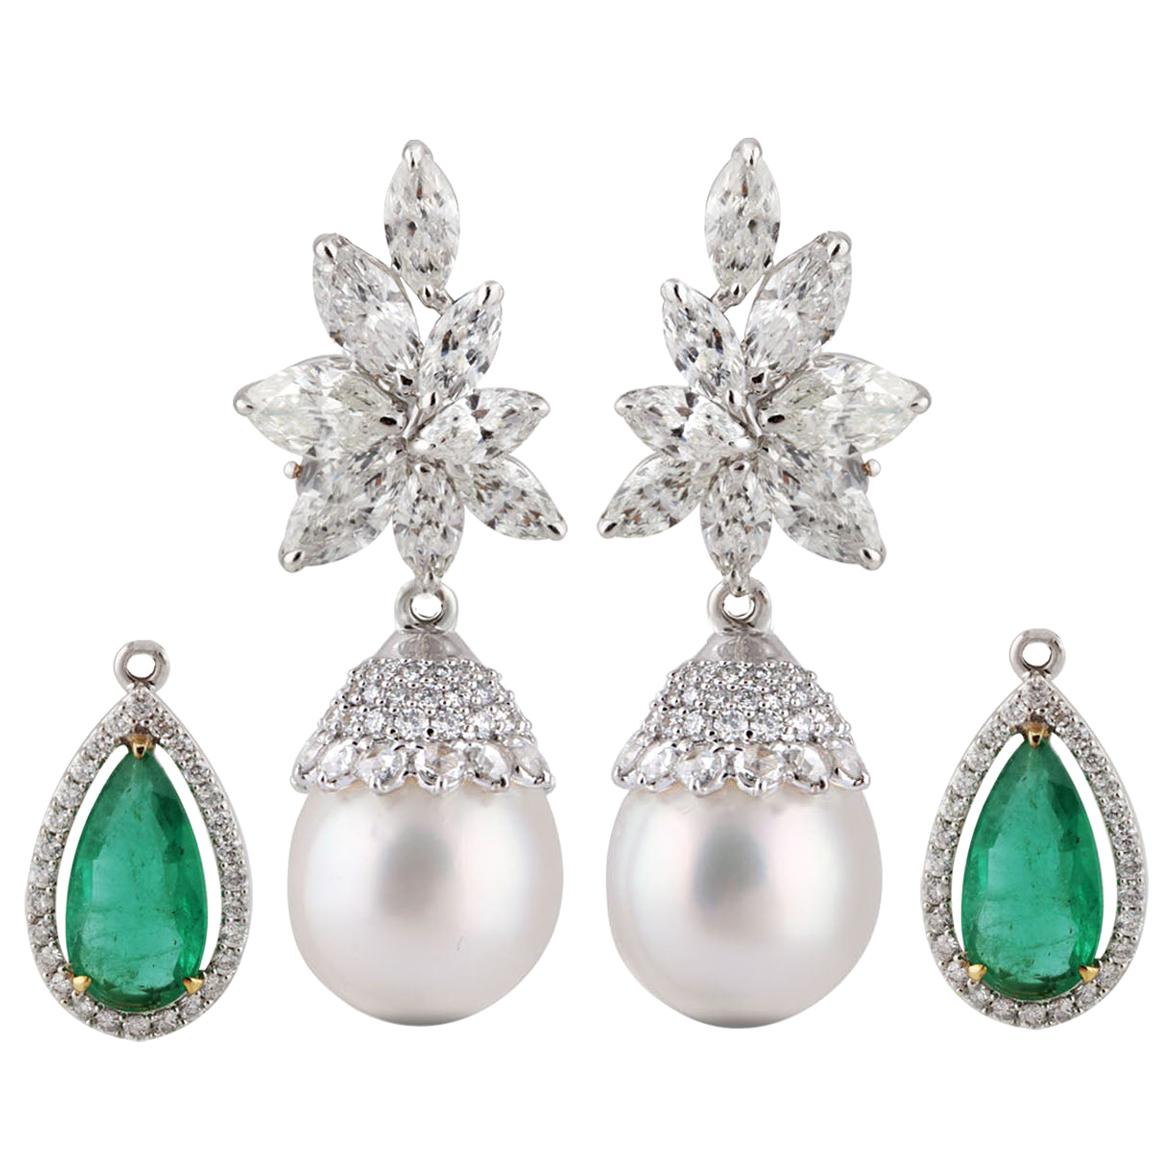 Diamonds Earrings in 18K Gold with Changeable Drops of Emeralds and Pearls